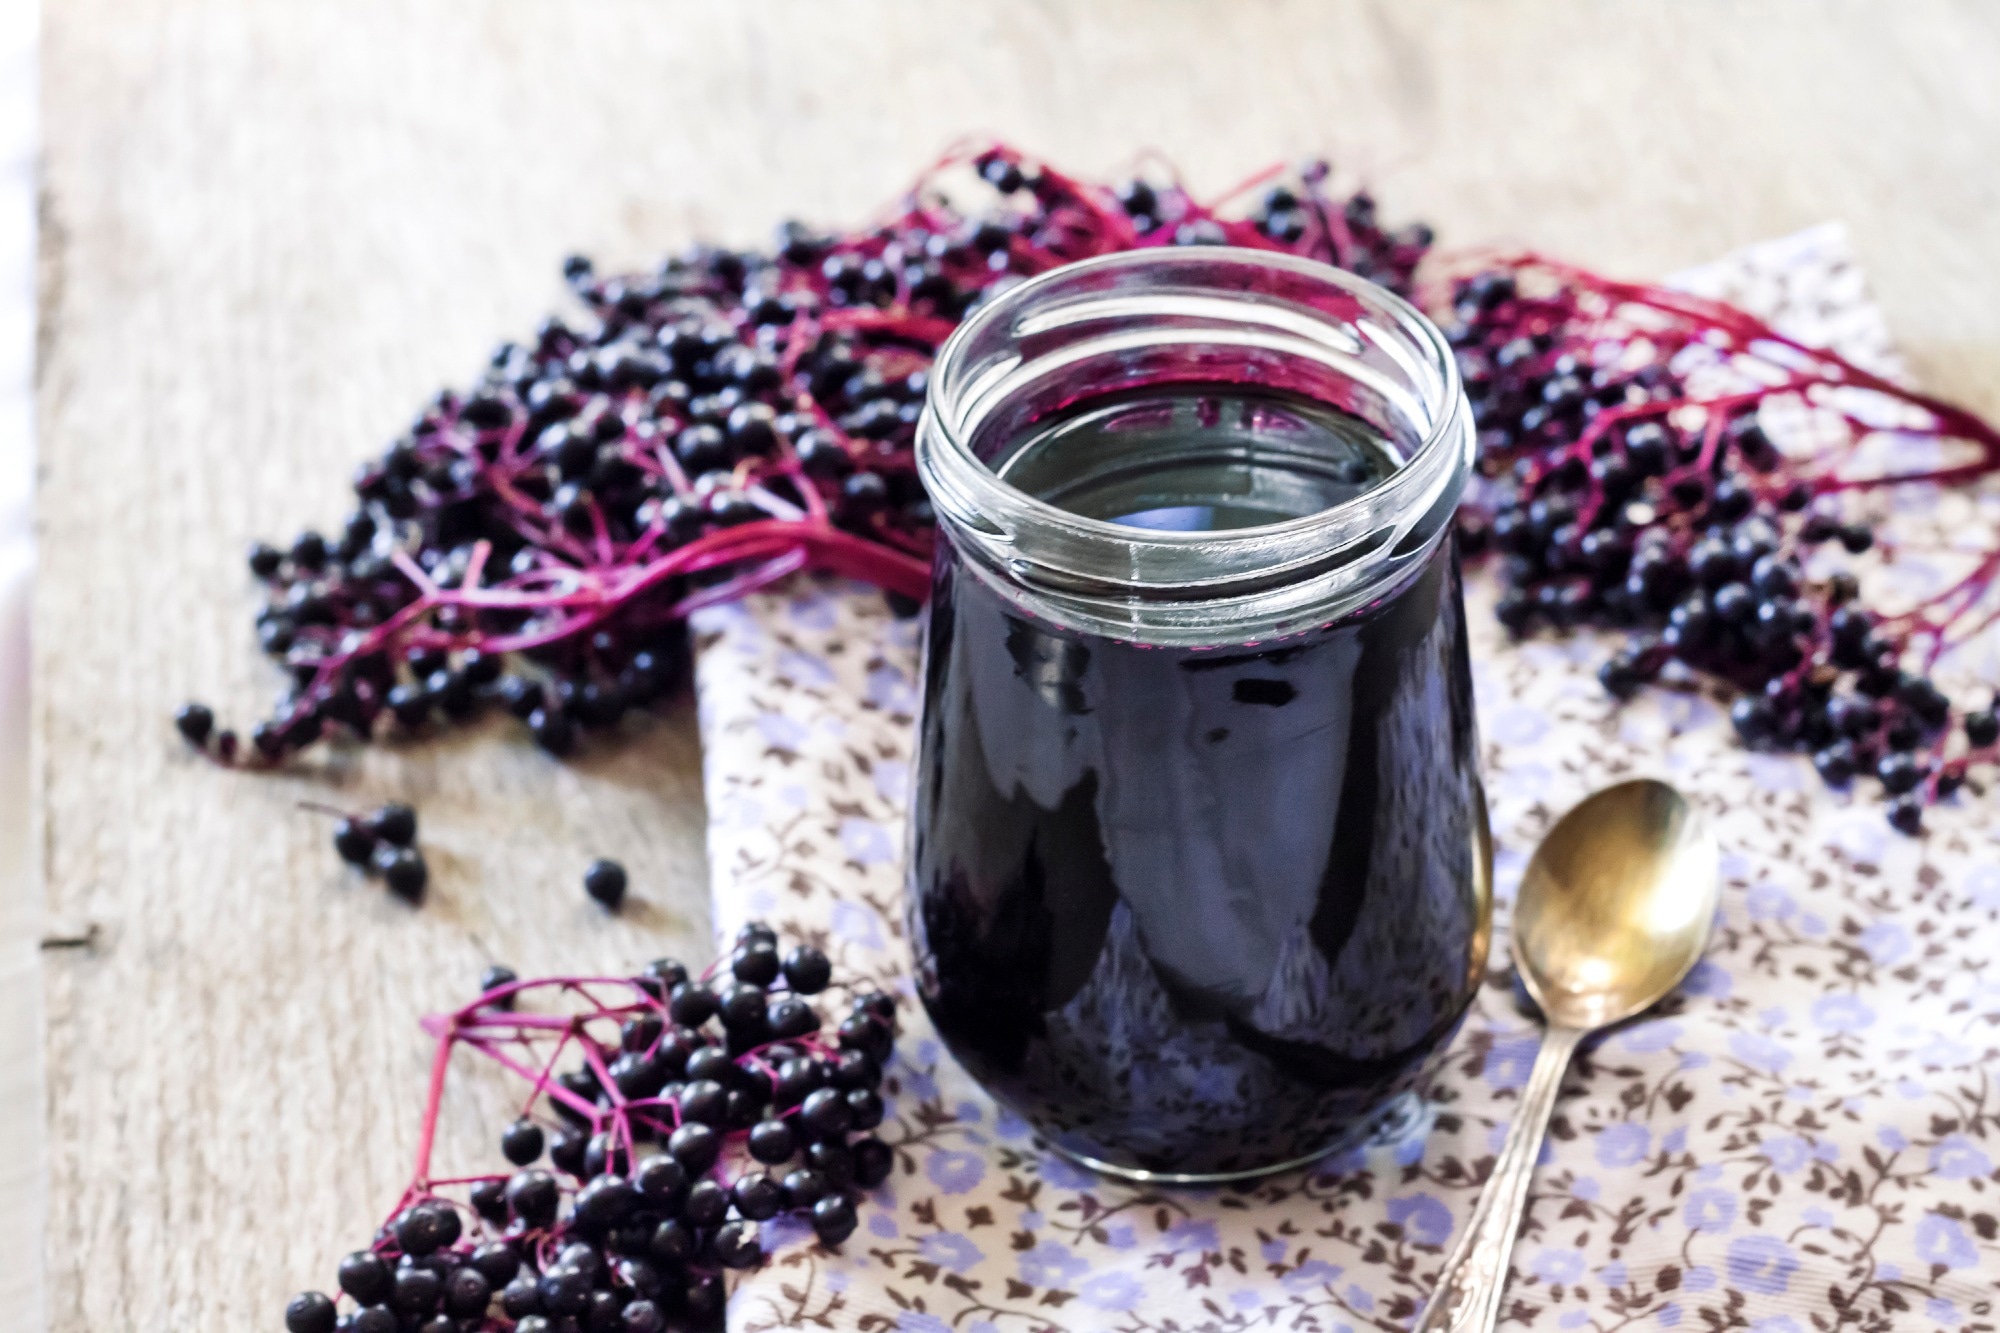 Study: One-Week Elderberry Juice Treatment Increases Carbohydrate Oxidation after a Meal Tolerance Test and Is Well Tolerated in Adults: A Randomized Controlled Pilot Study. Image Credit: TYNZA/Shutterstock.com